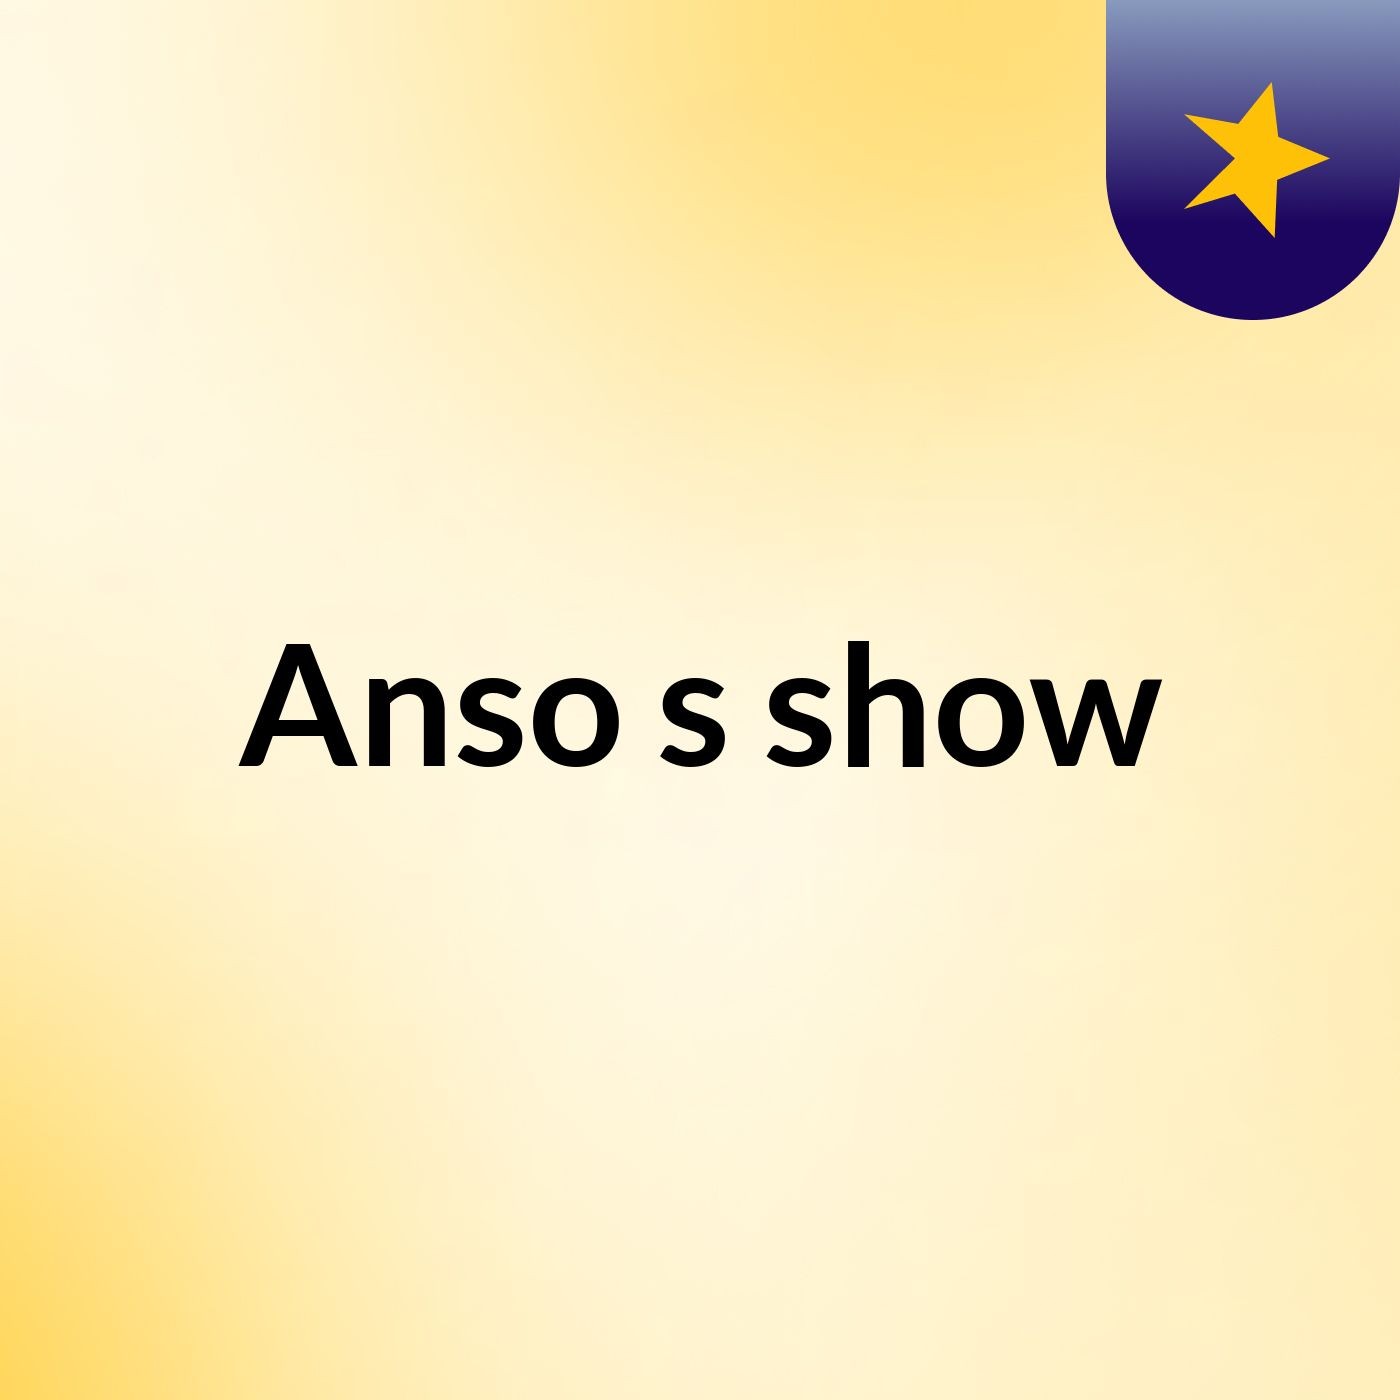 Anso's show